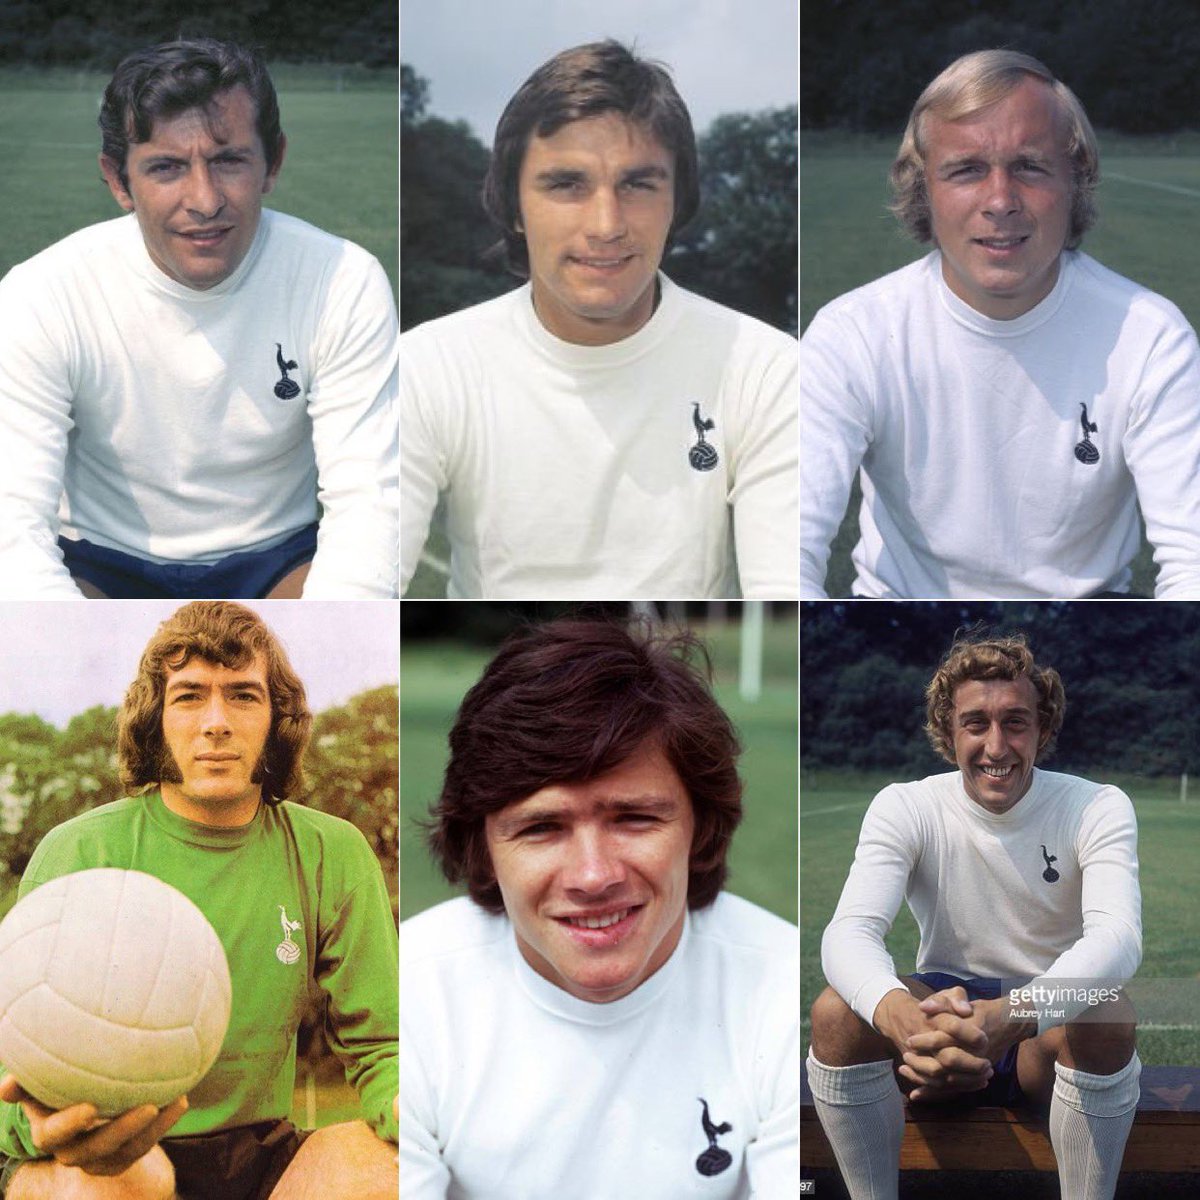 If you are going to do one Xmas night out this is the one. Spurs Show Live Mon Dec 6 with SIX legends never seen before match footage, raffle, merch and music   as we honour the 50th anniversary  of the UEFA Cup win  All details & packages at https://t.co/4IUlhCd5Mv #THFC #COYS https://t.co/DWjNjch8zN